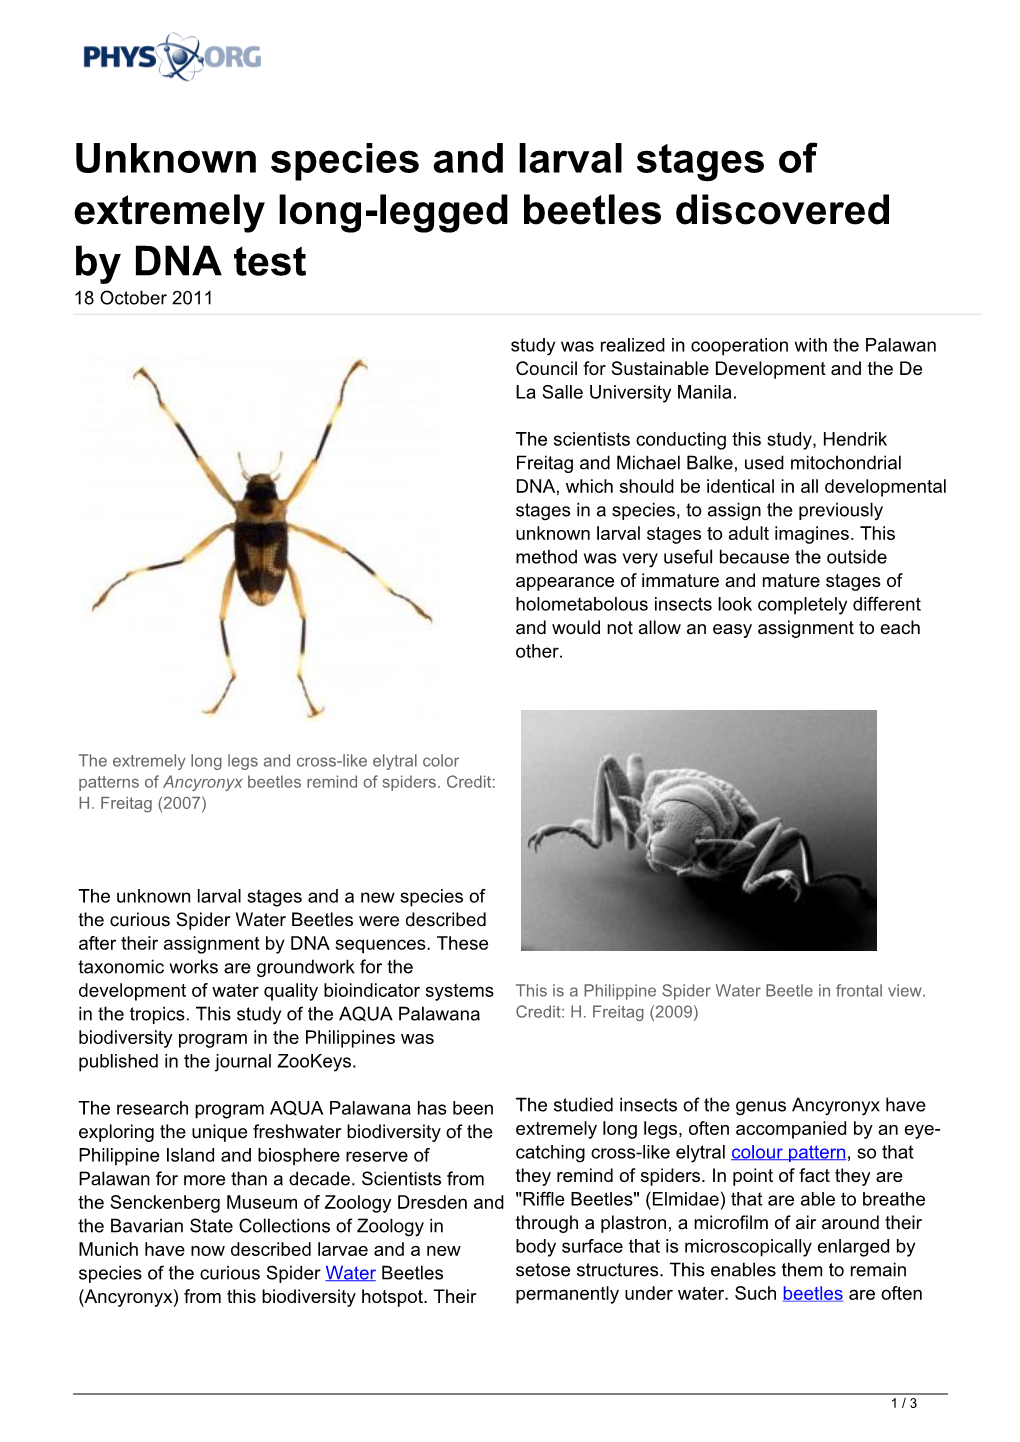 Unknown Species and Larval Stages of Extremely Long-Legged Beetles Discovered by DNA Test 18 October 2011